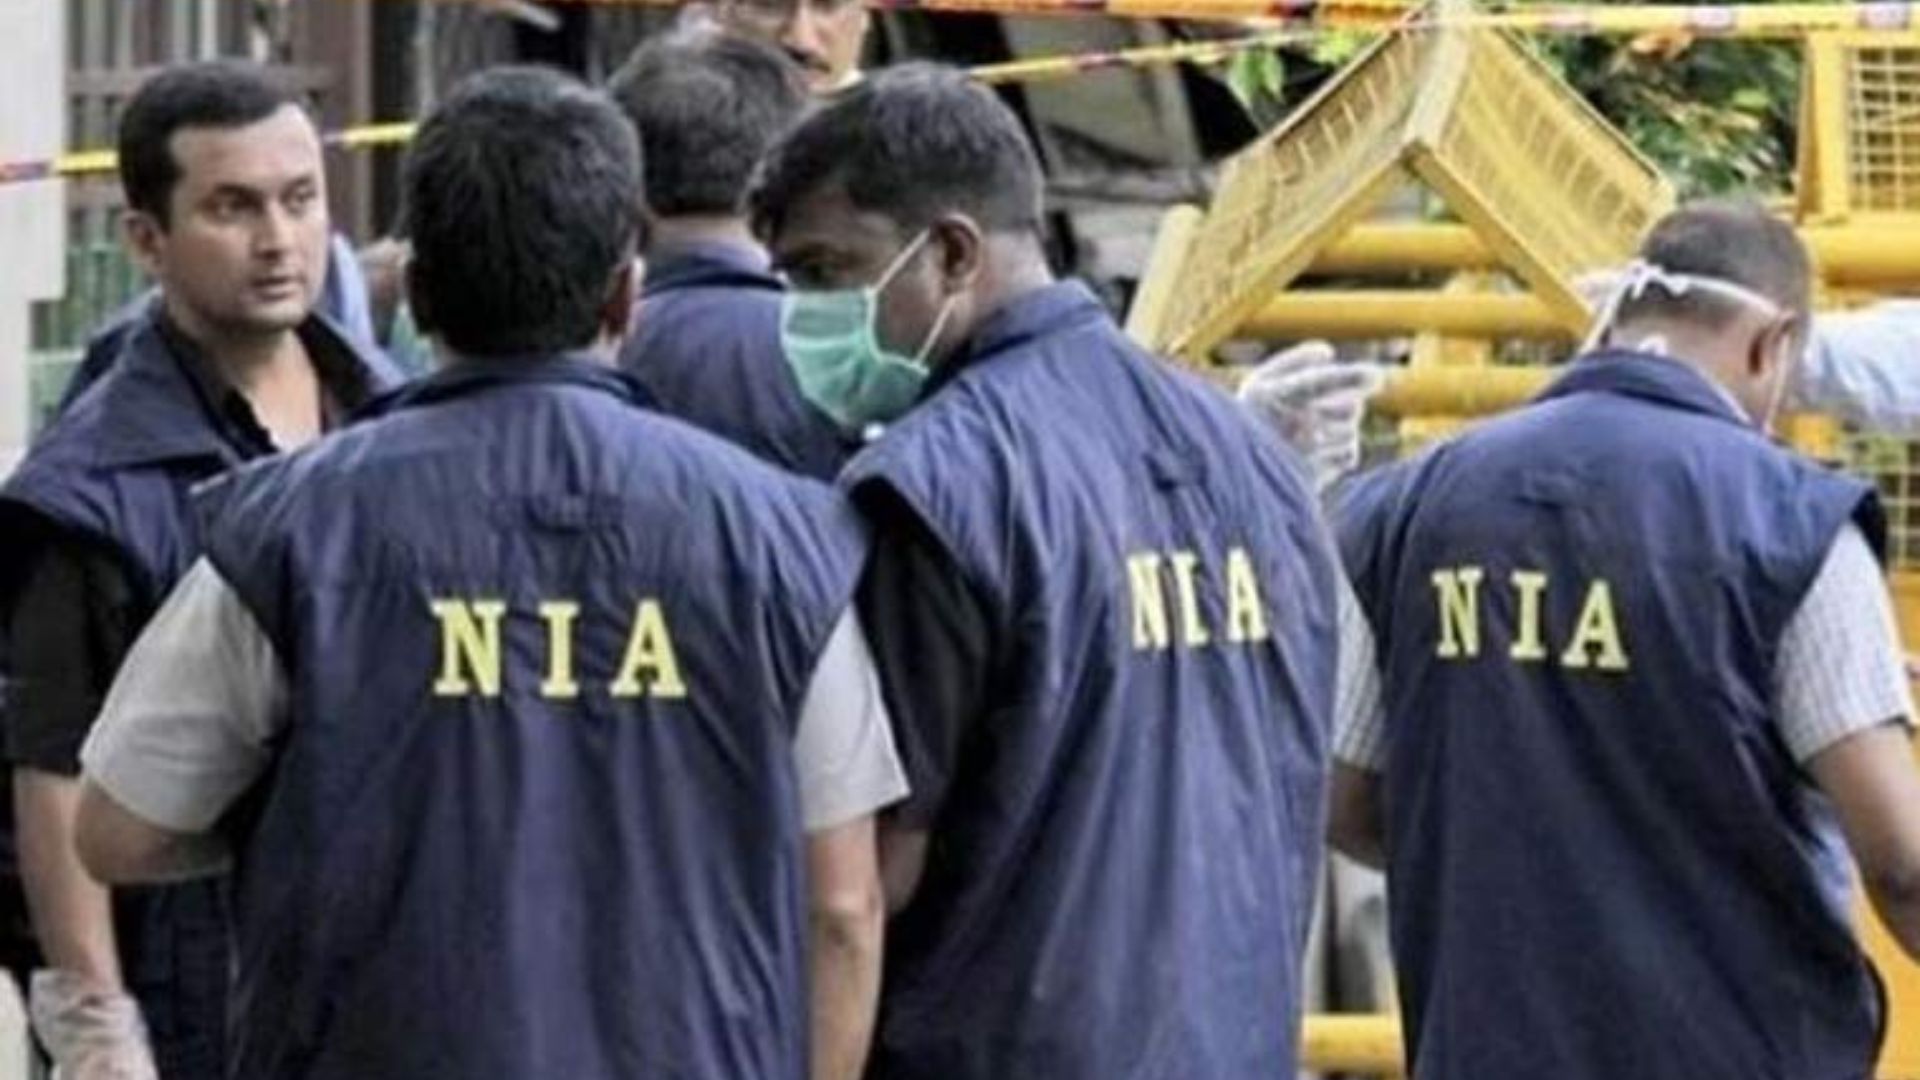 WB Police summons two NIA officers in connection with investigation into Bhupatinagar attack